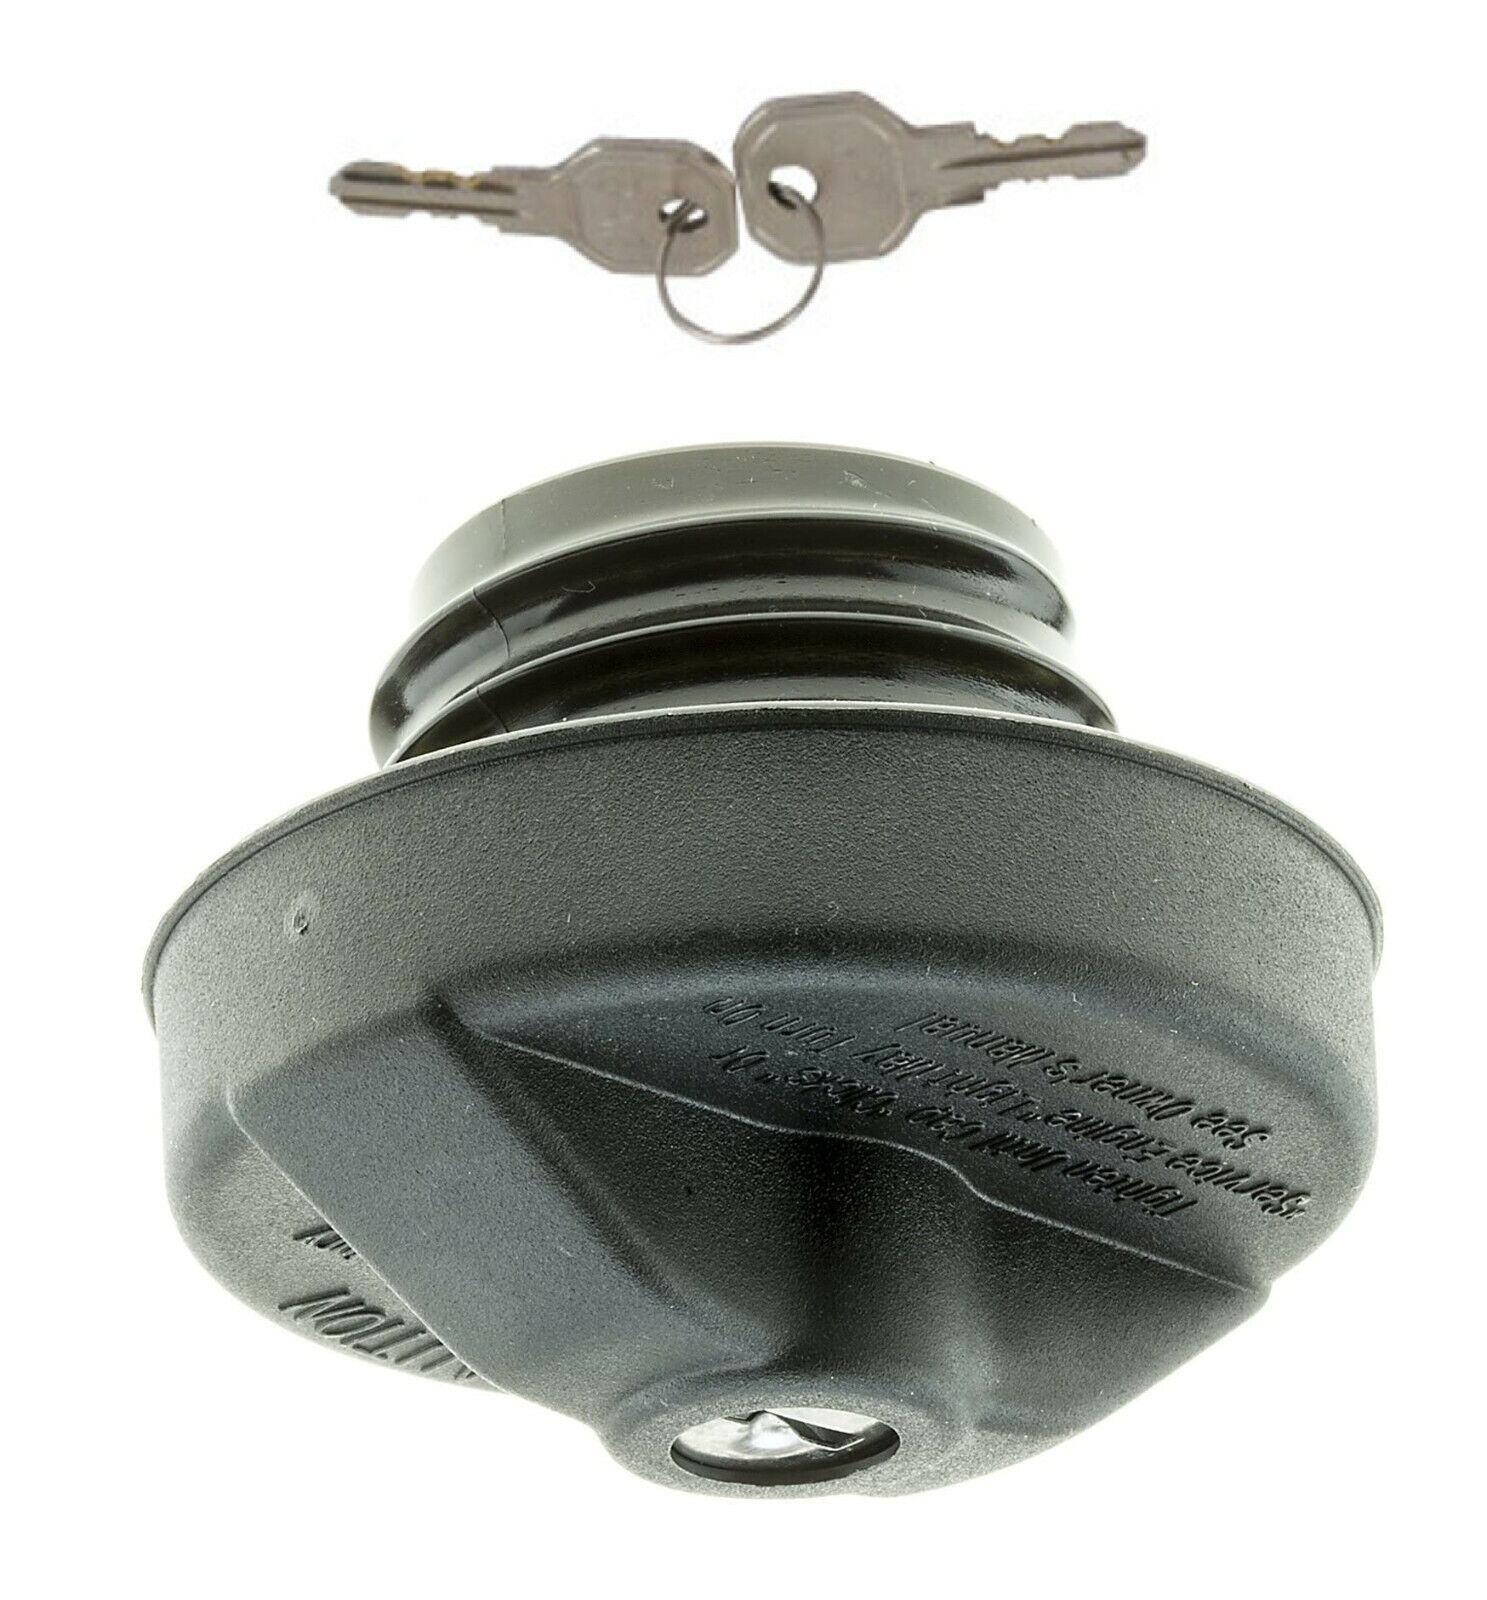 SCREW ON STYLE Fuel Tank Locking Lockable Lock Gas Cap Lid Cover w/ KEY for Ford